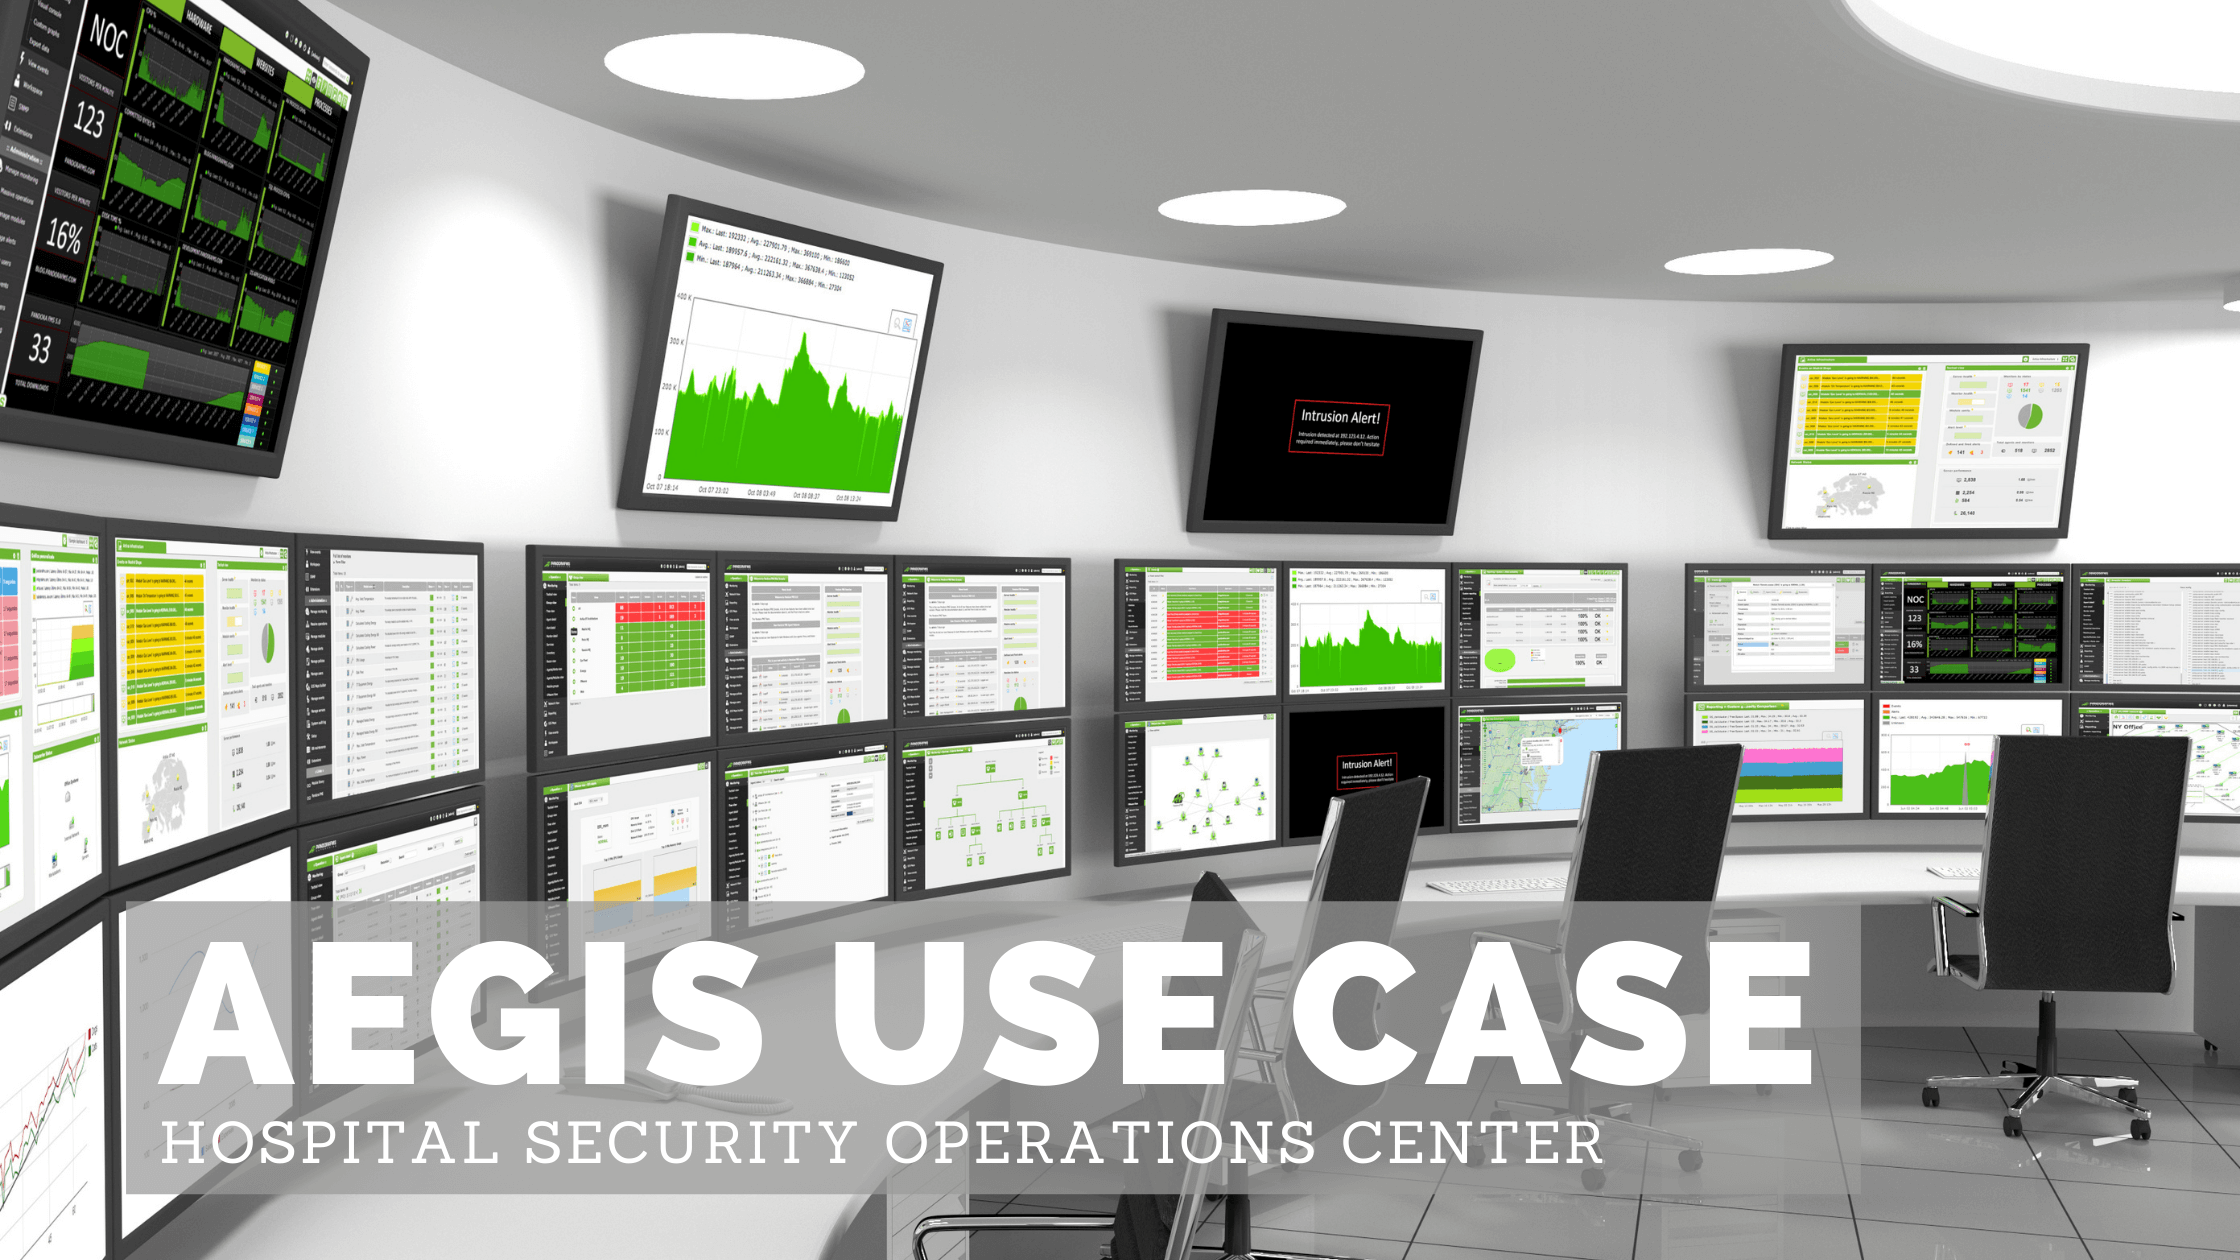 AEGIS and Seven Blind Mice at a Major Hospital Security Operations Center